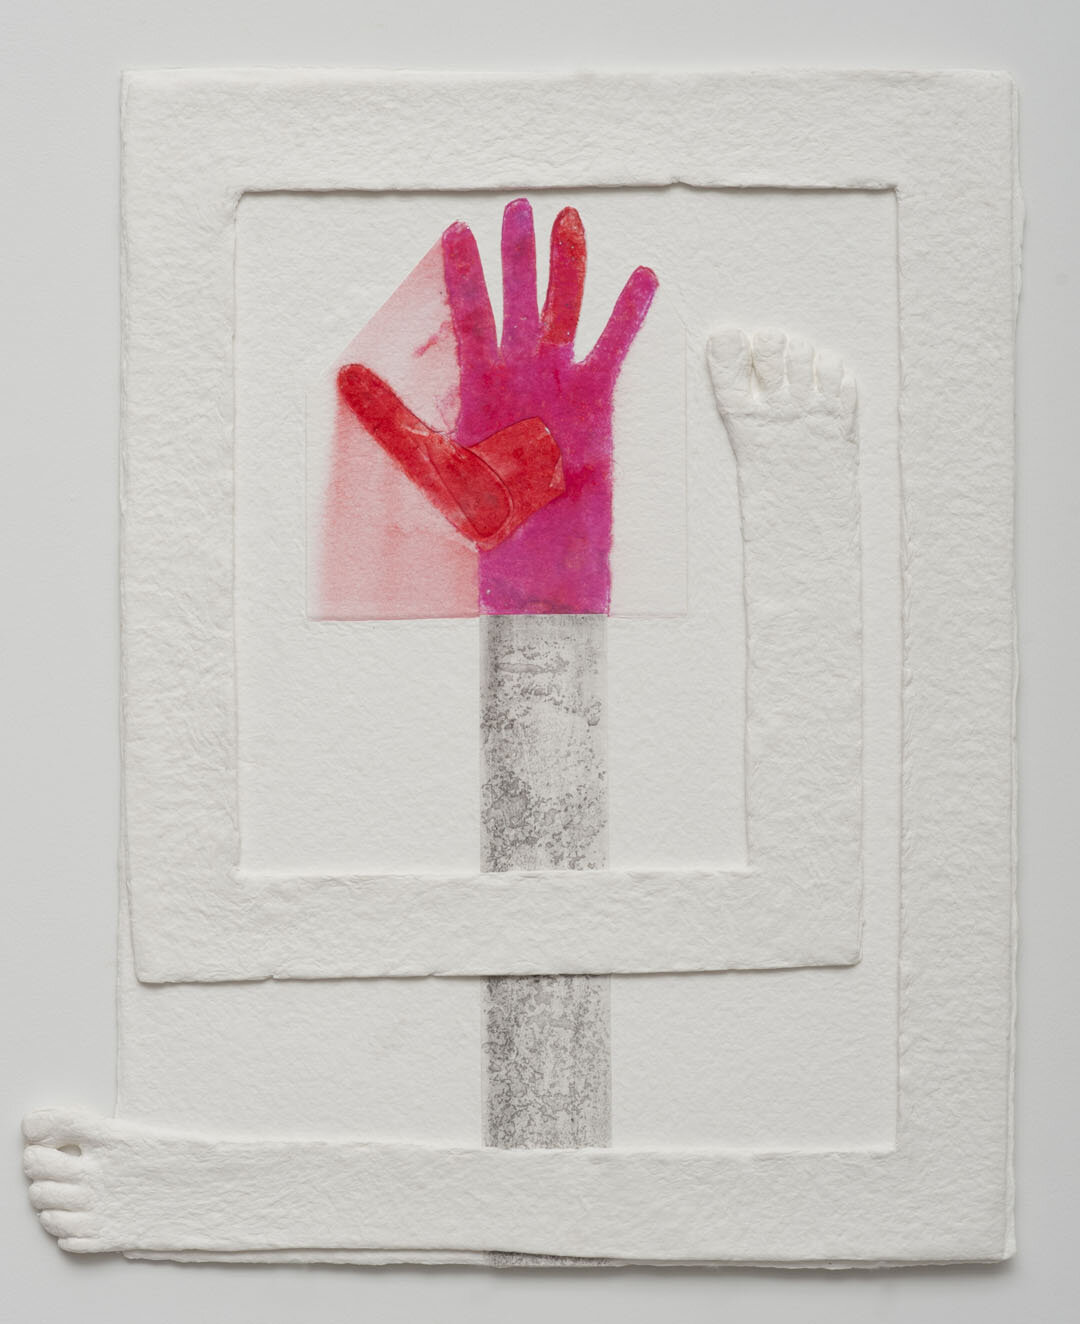   Jennifer Cohen   Relief in Six Parts (i) , 2010 pigment and cast paper collage on handmade paper 24 x 20 inches 